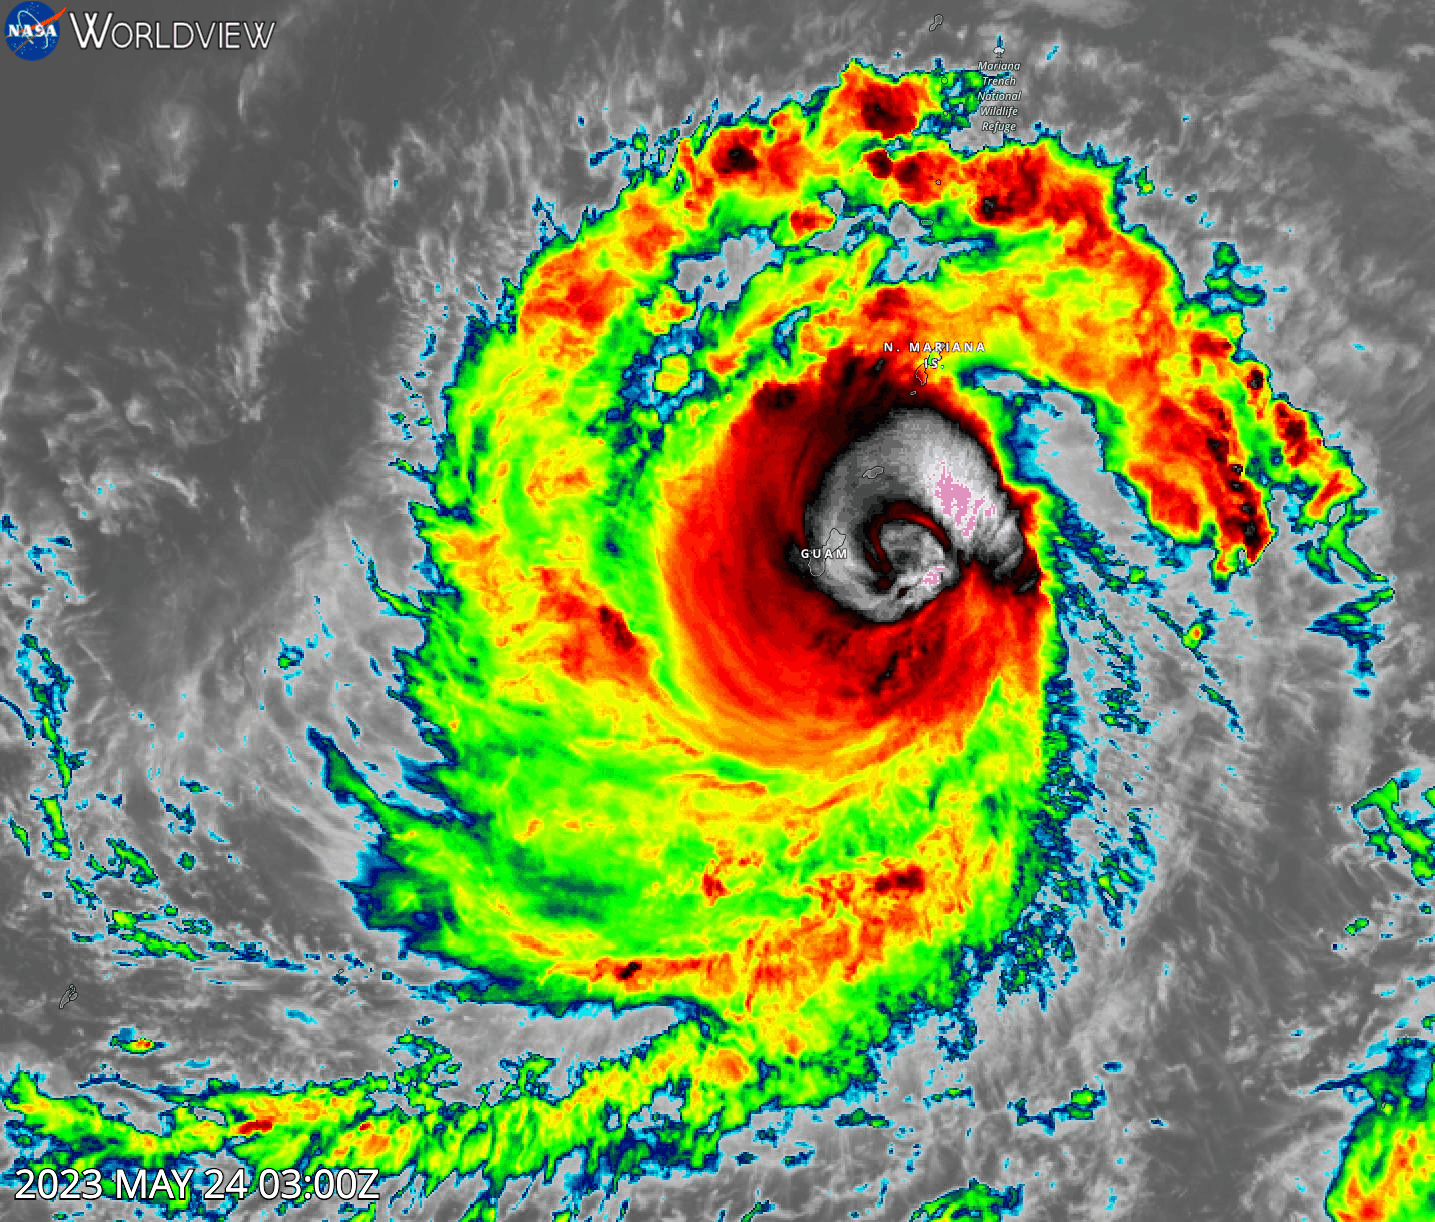 Super Typhoon Mawar over Guam on 24 May 2023 from the AHI instrument aboard the Himawari-8 satellite